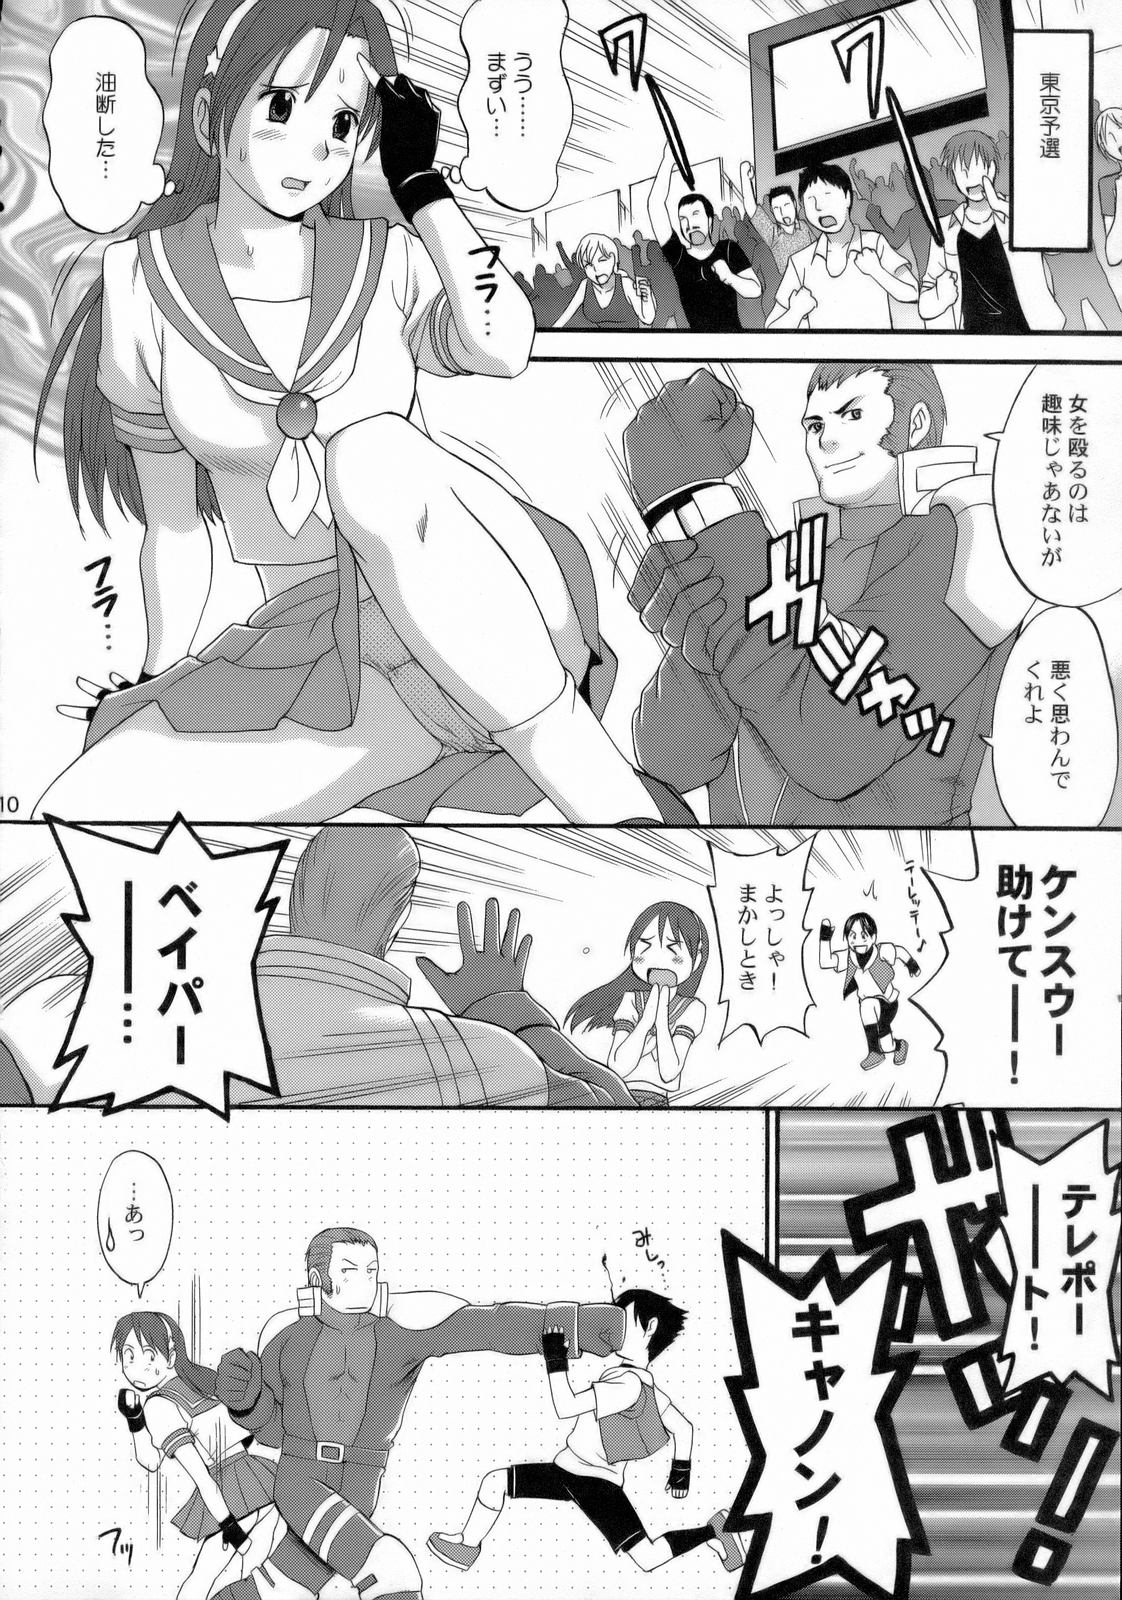 (C71) [Saigado] THE ATHENA & FRIENDS 2006 (King of Fighters) page 9 full